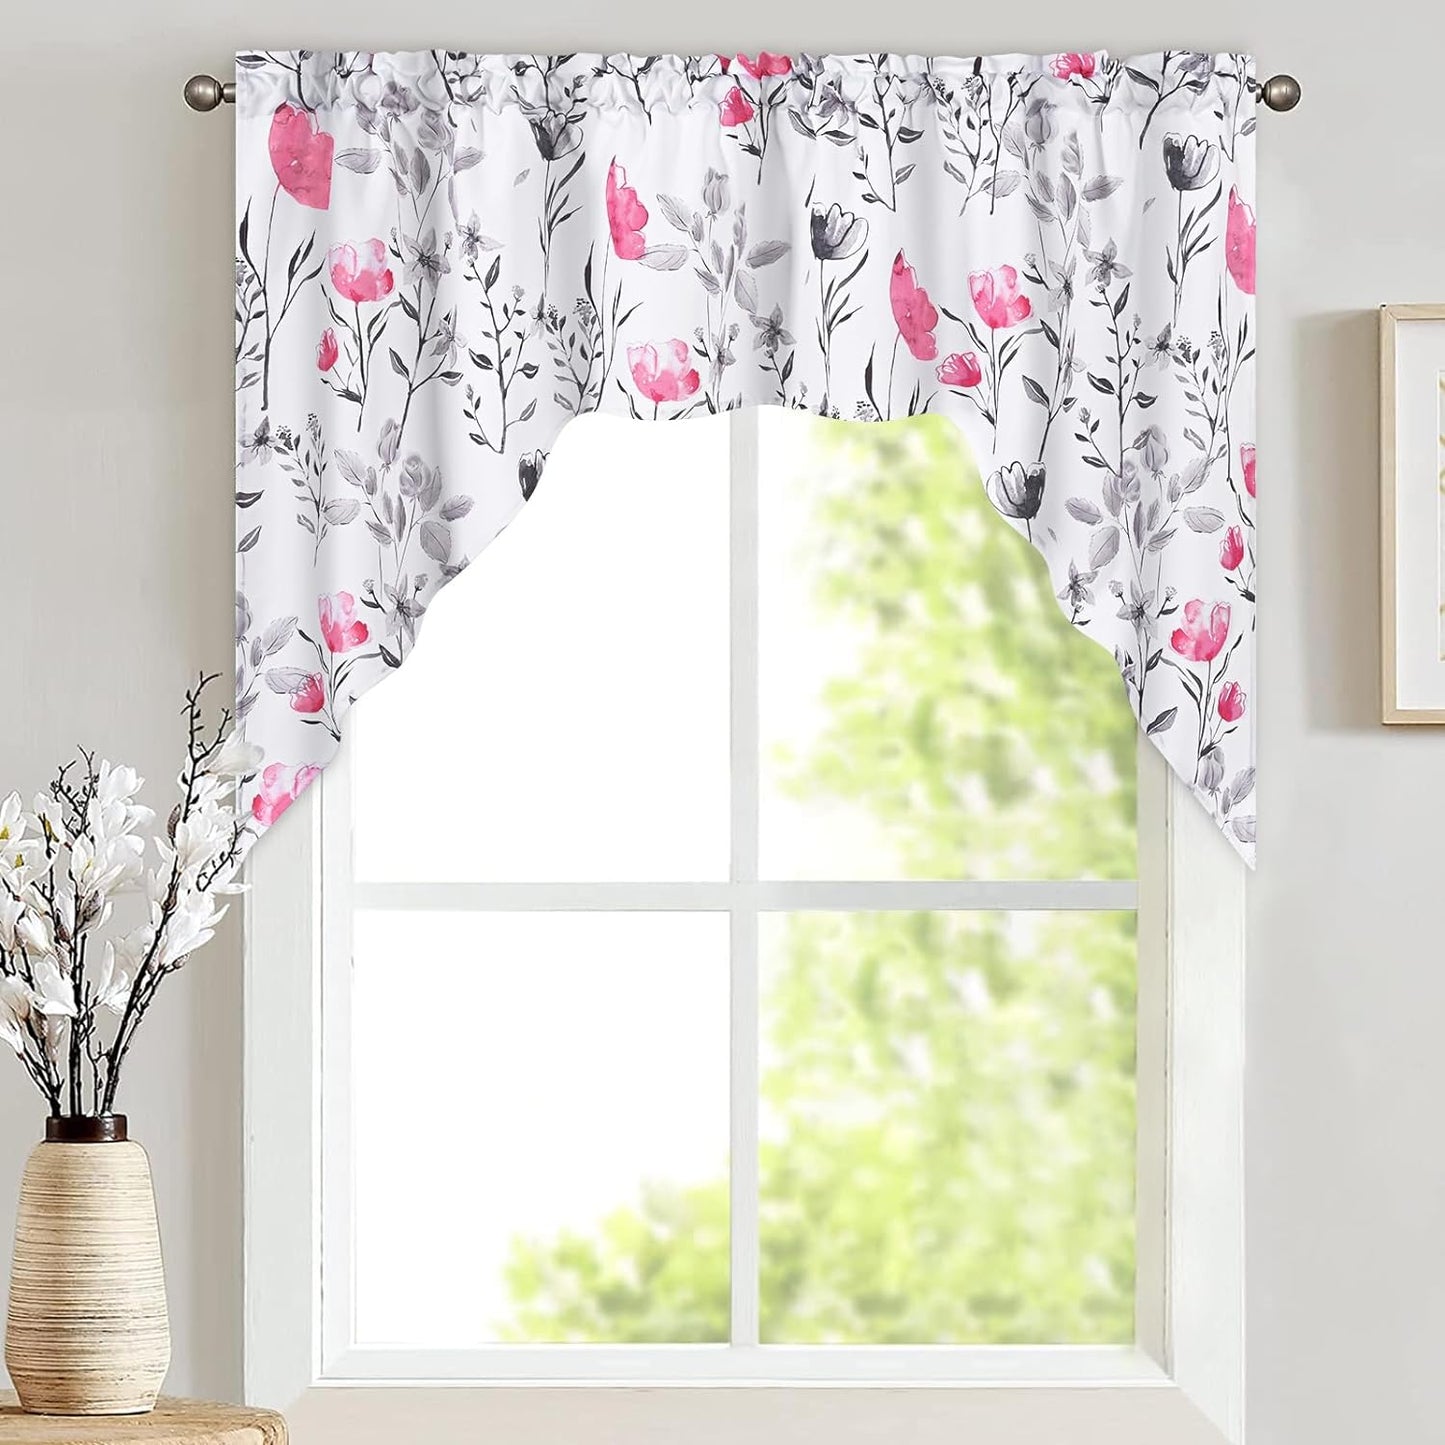 Likiyol Floral Kithchen Curtains 36 Inch Watercolor Flower Leaves Tier Curtains, Yellow and Gray Floral Cafe Curtains, Rod Pocket Small Window Curtain for Cafe Bathroom Bedroom Drapes  Likiyol Pink 36"L X 60"W 